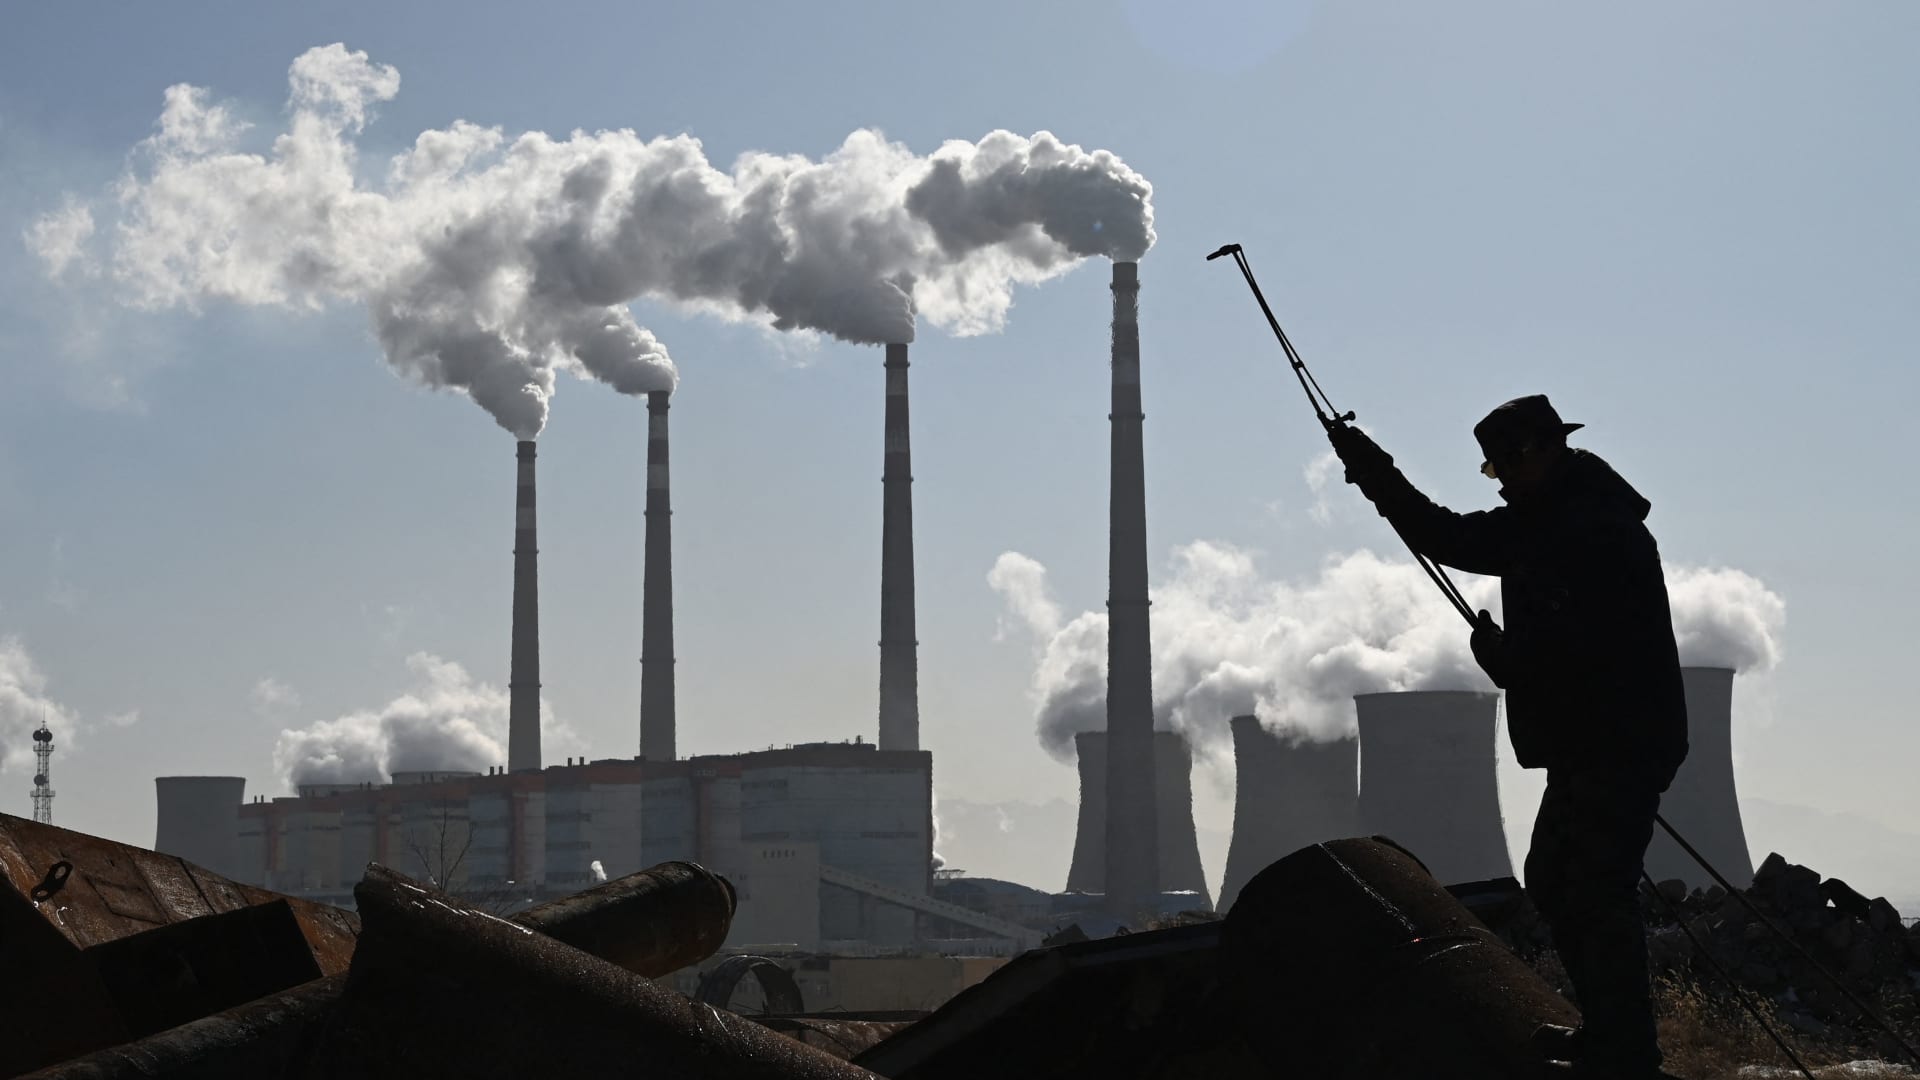 A worker cutting steel pipes near a coal-powered power station in Zhangjiakou, China, on Nov. 12, 2021. The country's biggest consumers of steel and its economic growth engines — such as property construction and infrastructure development — have gone quiet, according to one analyst.